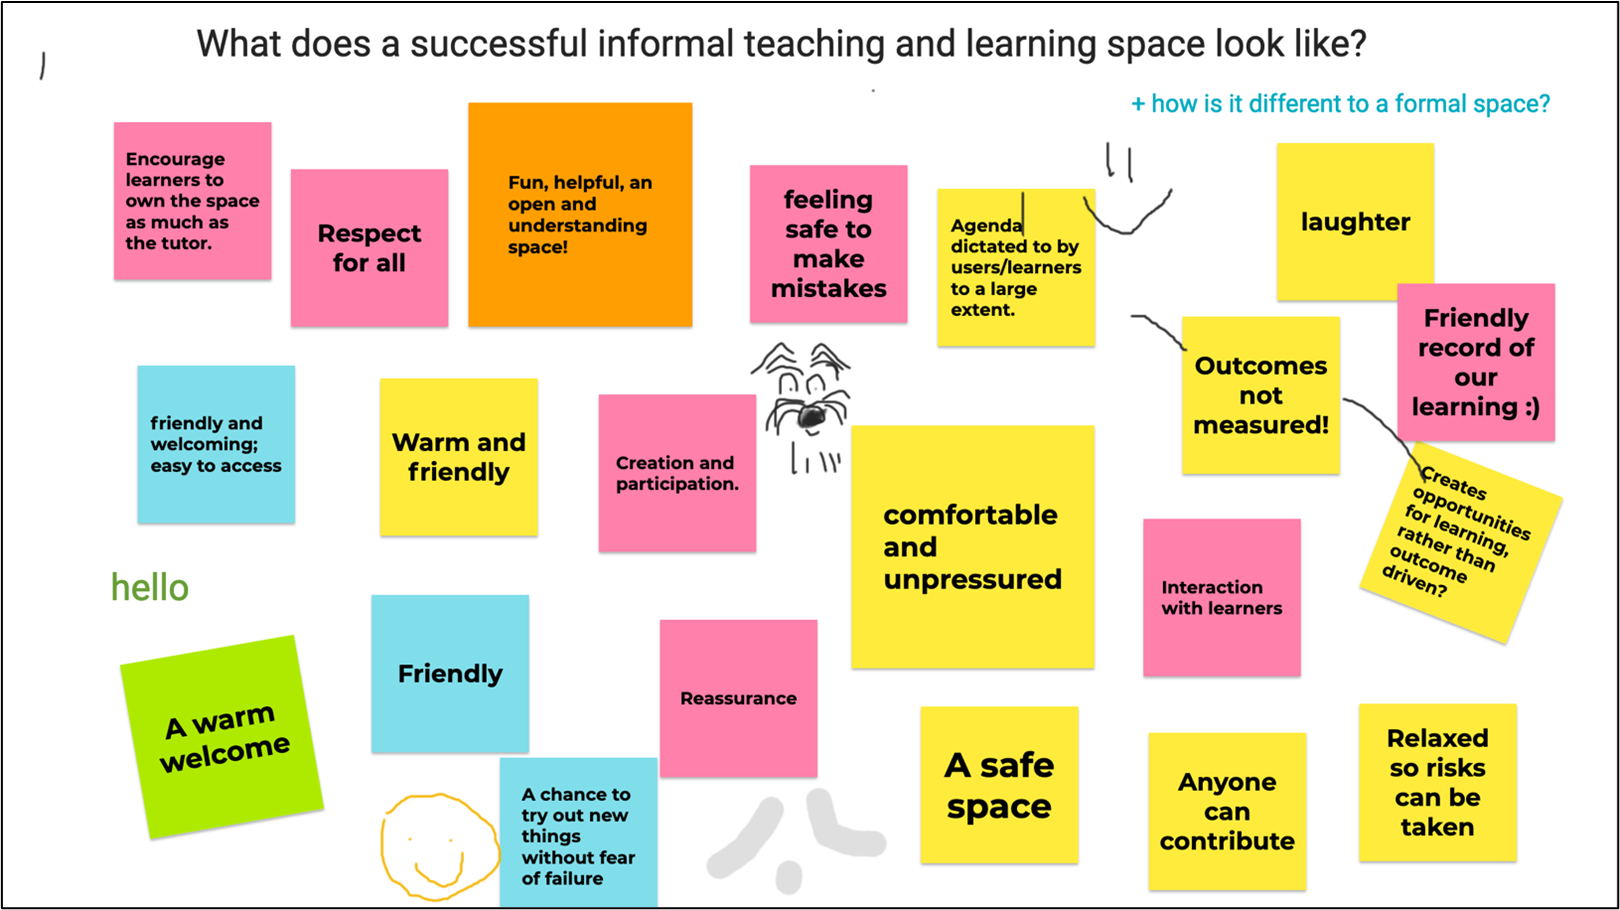 Grid showing 'what does a successful informal teaching and learning space look like?' for Chloe's ATS project